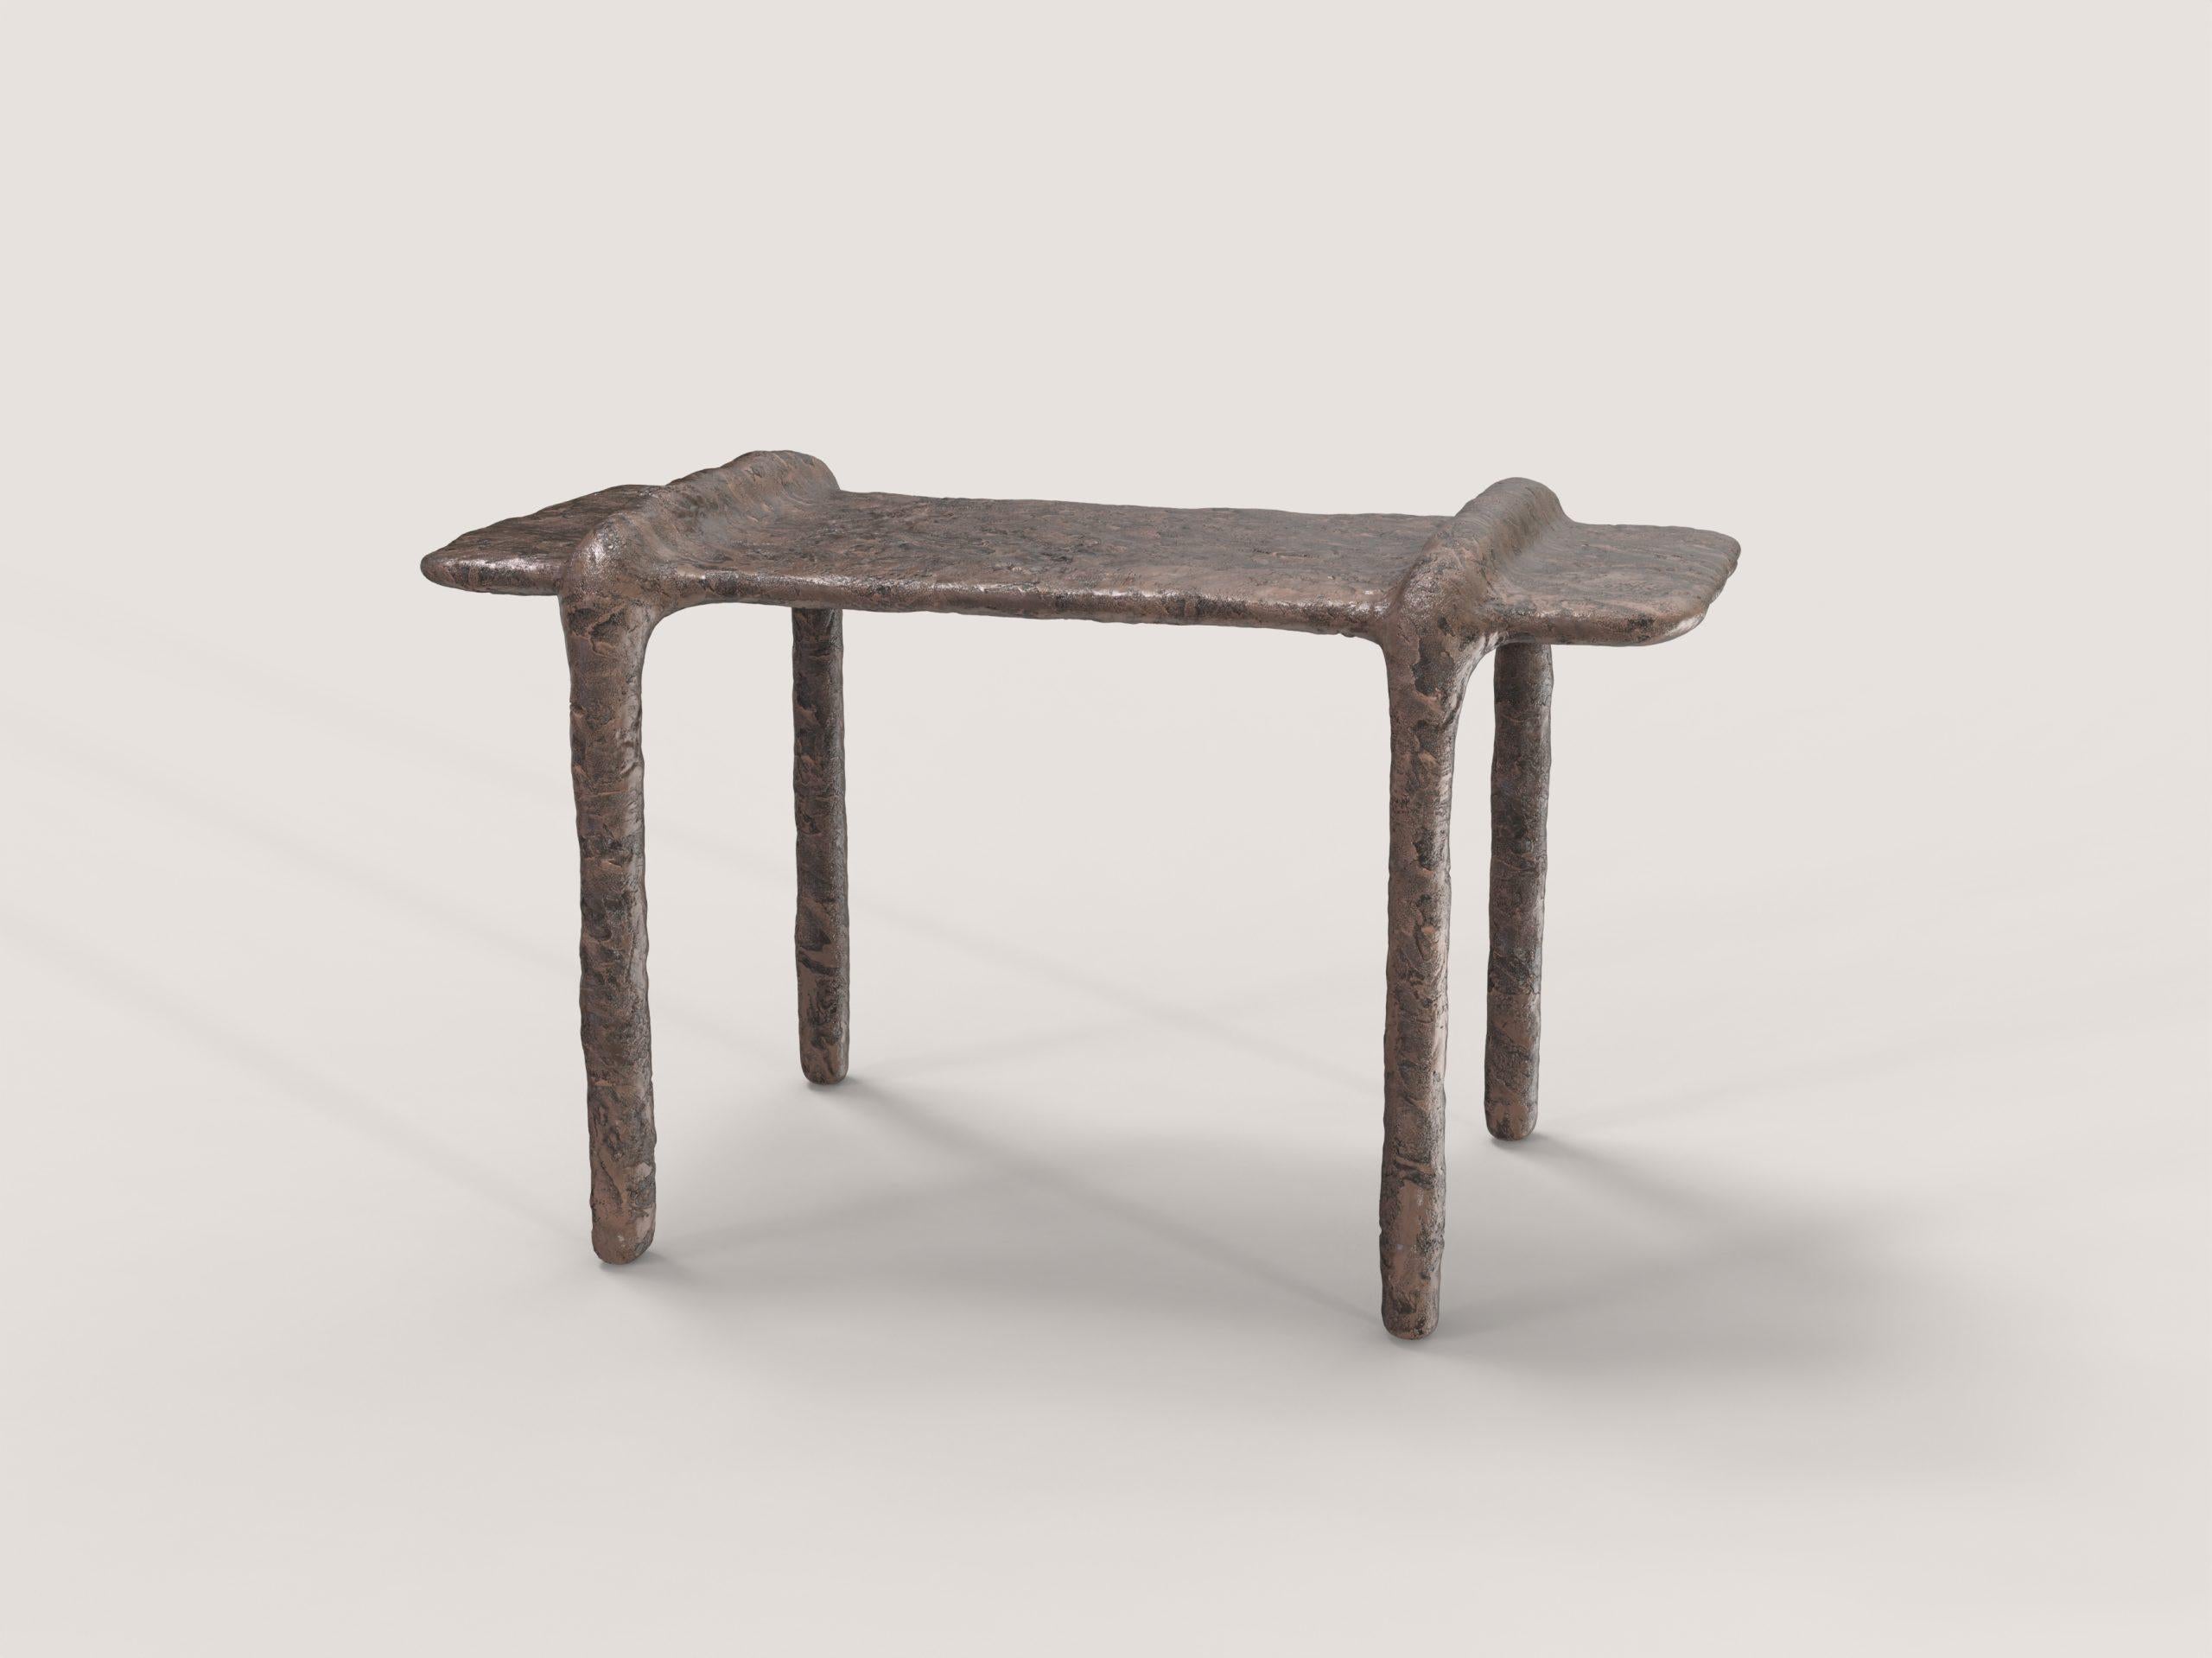 Ala V1 low table by Edizione Limitata
Limited Edition of 150 pieces. Signed and numbered.
Dimensions: D 38 x W 71 x H 43 cm.
Materials: cast bronze.

This low table also can be used as a stool. Please contact us.

Edizione Limitata, that is